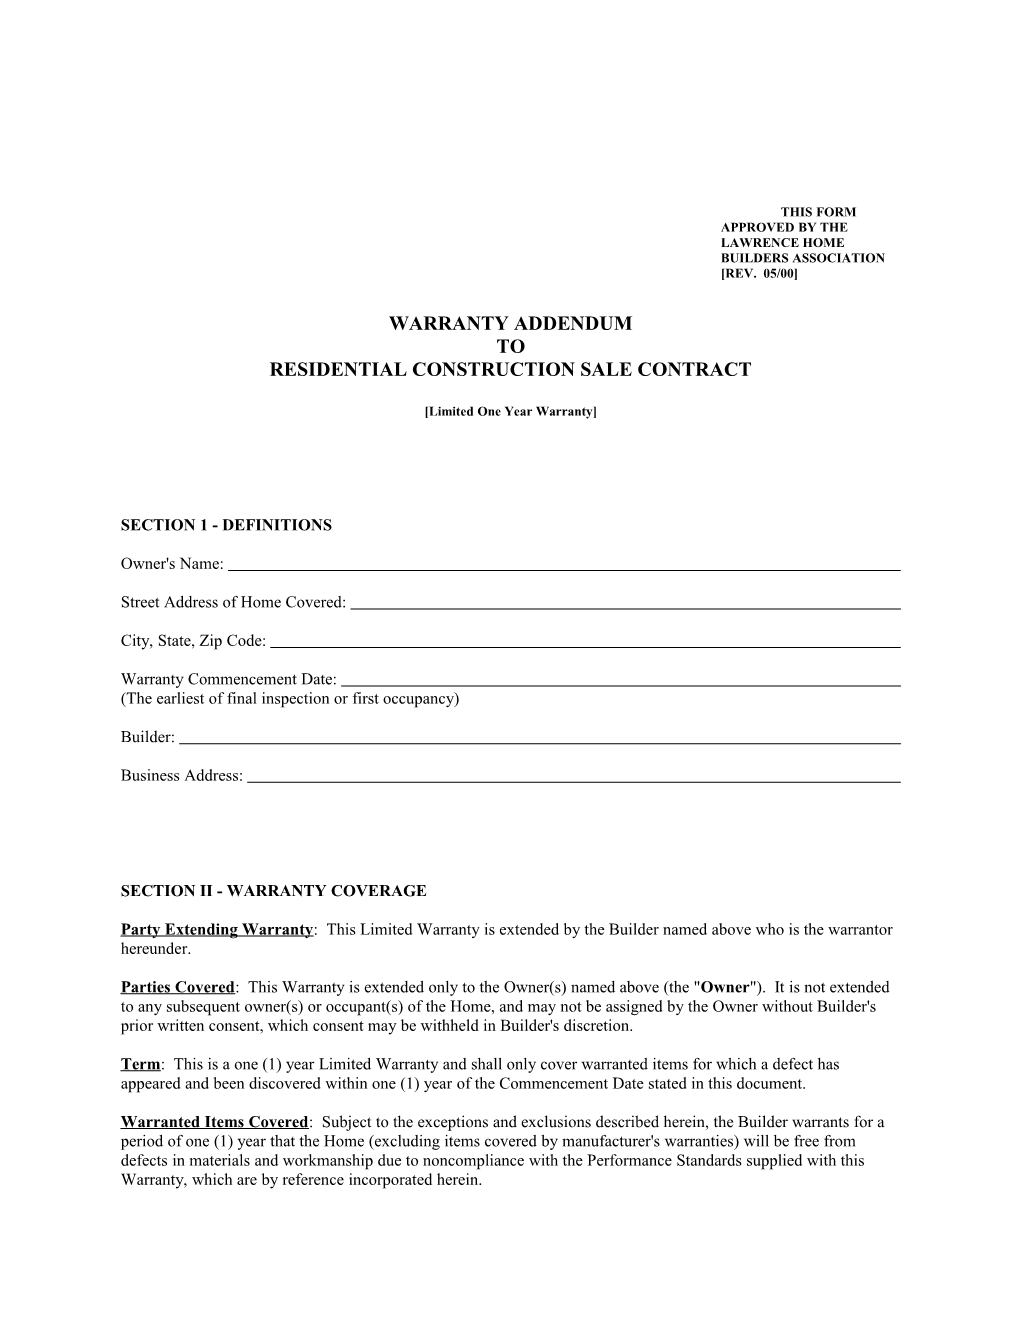 This Form Approved by the Lawrence Home Builders Association Rev. 05/00